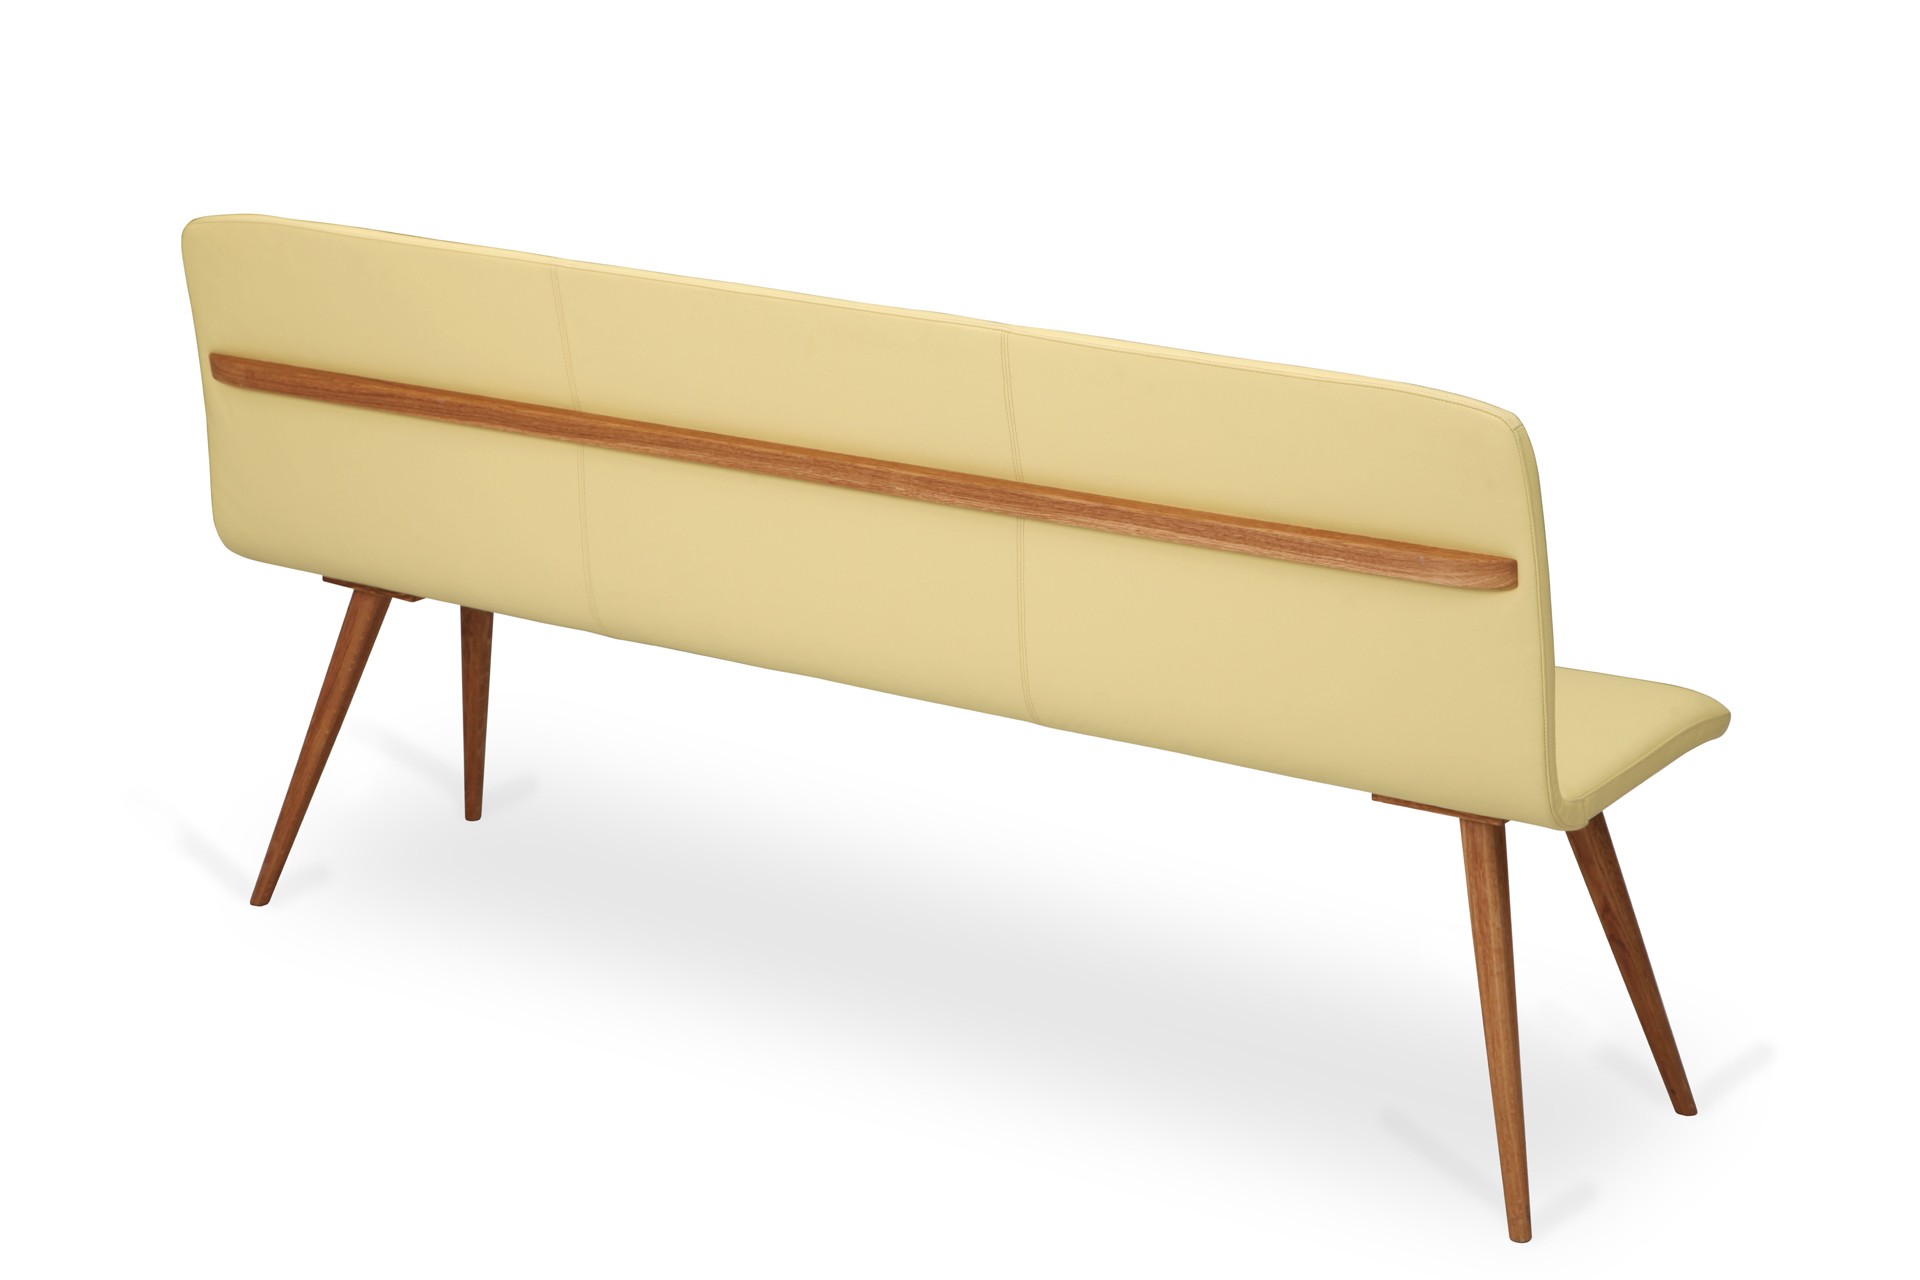 GATTA BENCH wholly upholstered with handle